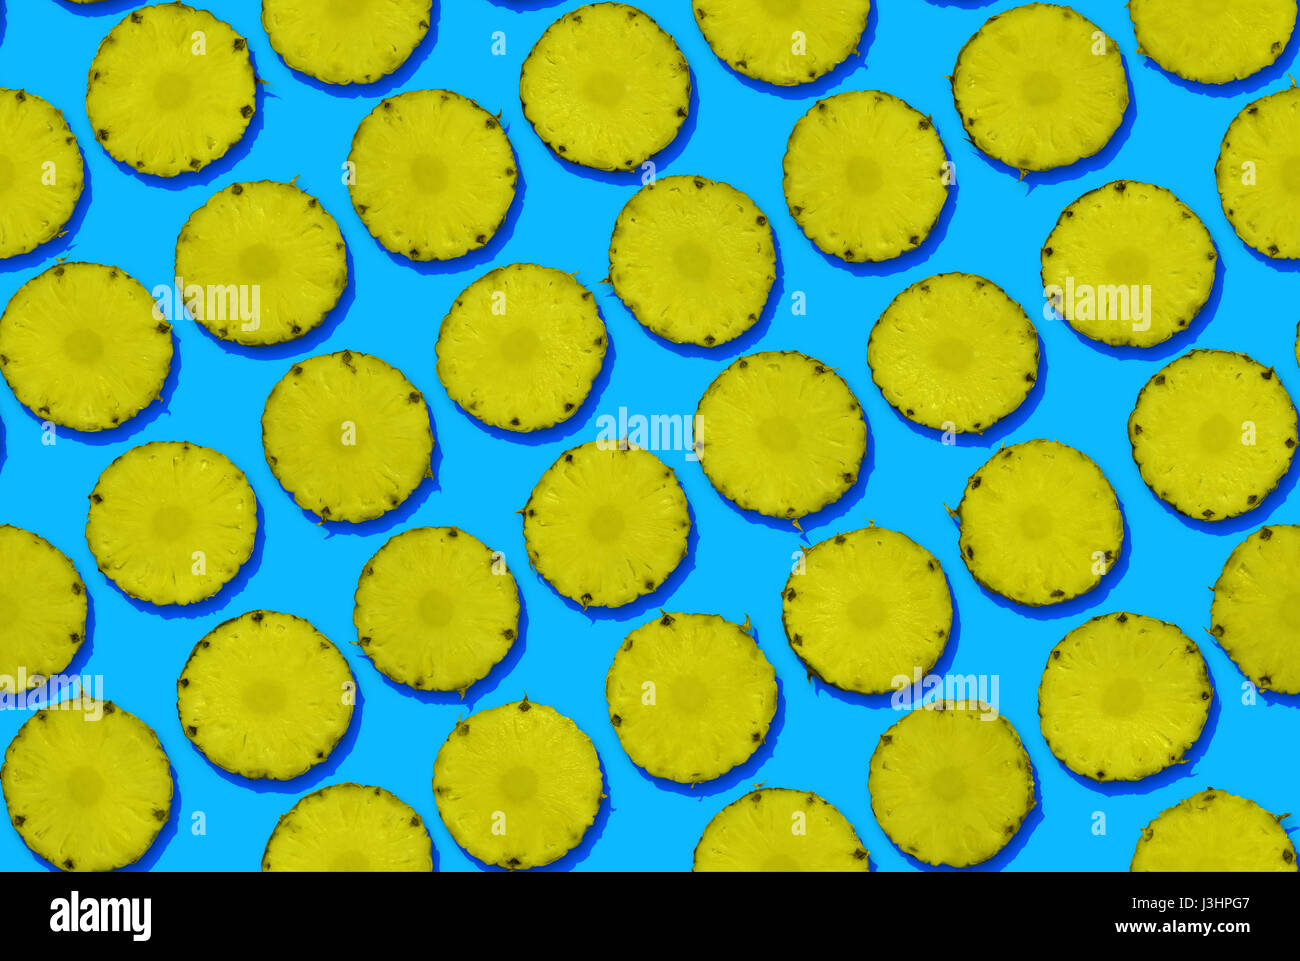 Pineapples on blue background, seamless Stock Photo